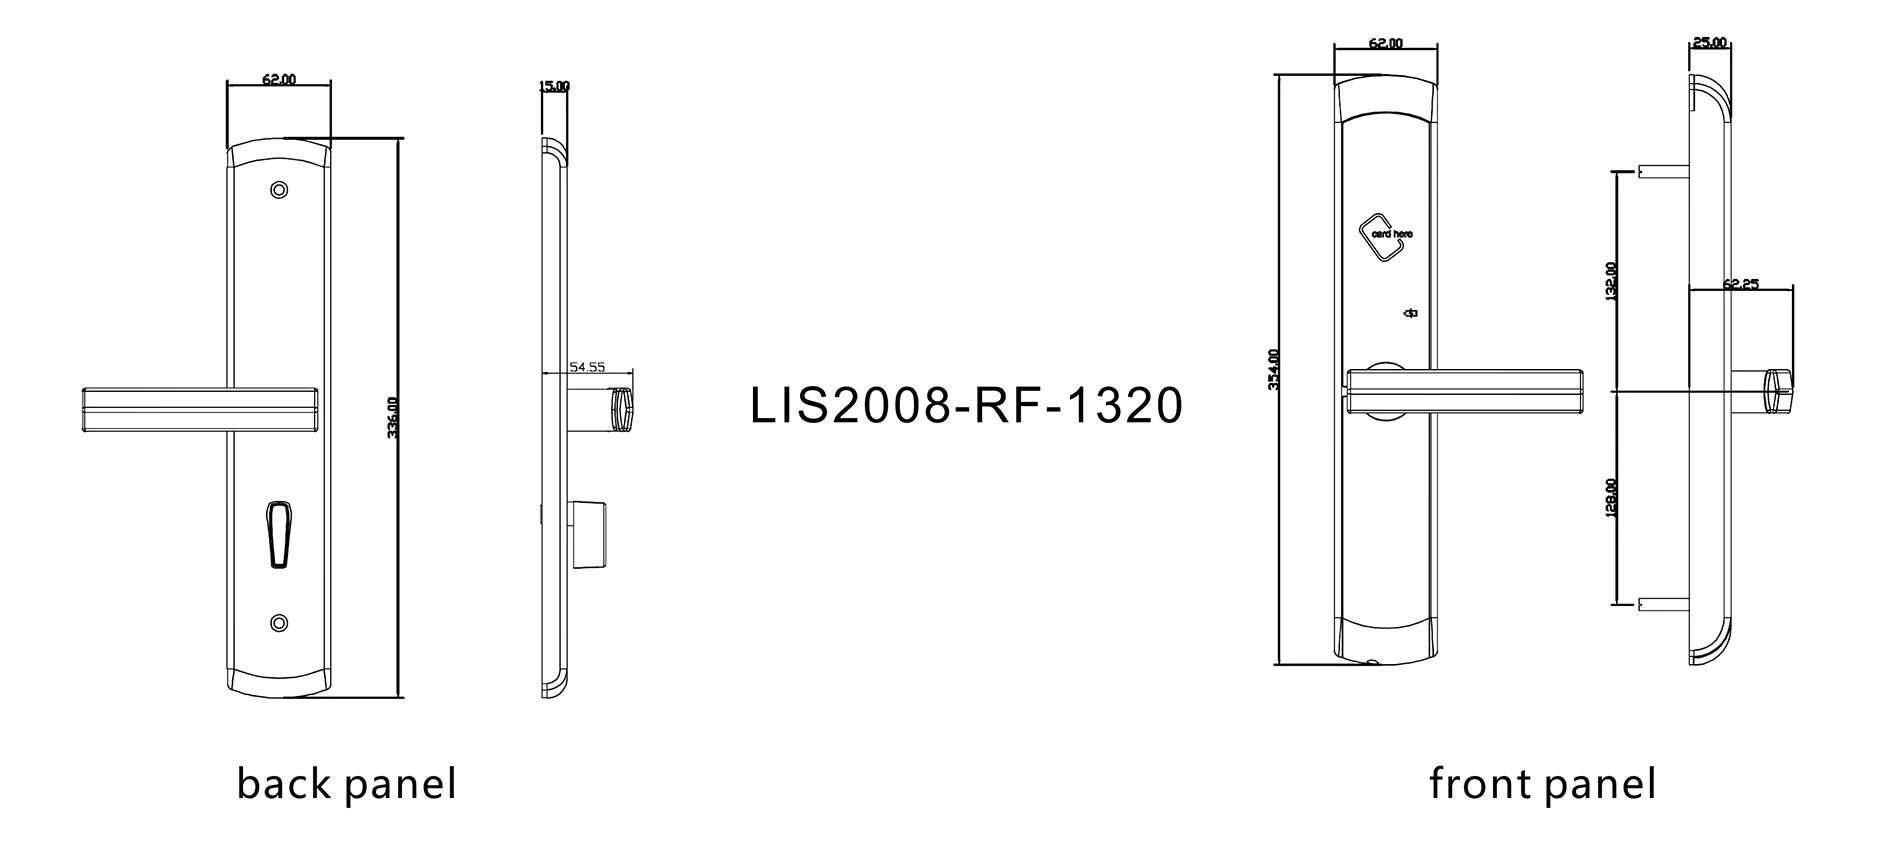 hotel room security door locks rfs800l for guesthouse Level